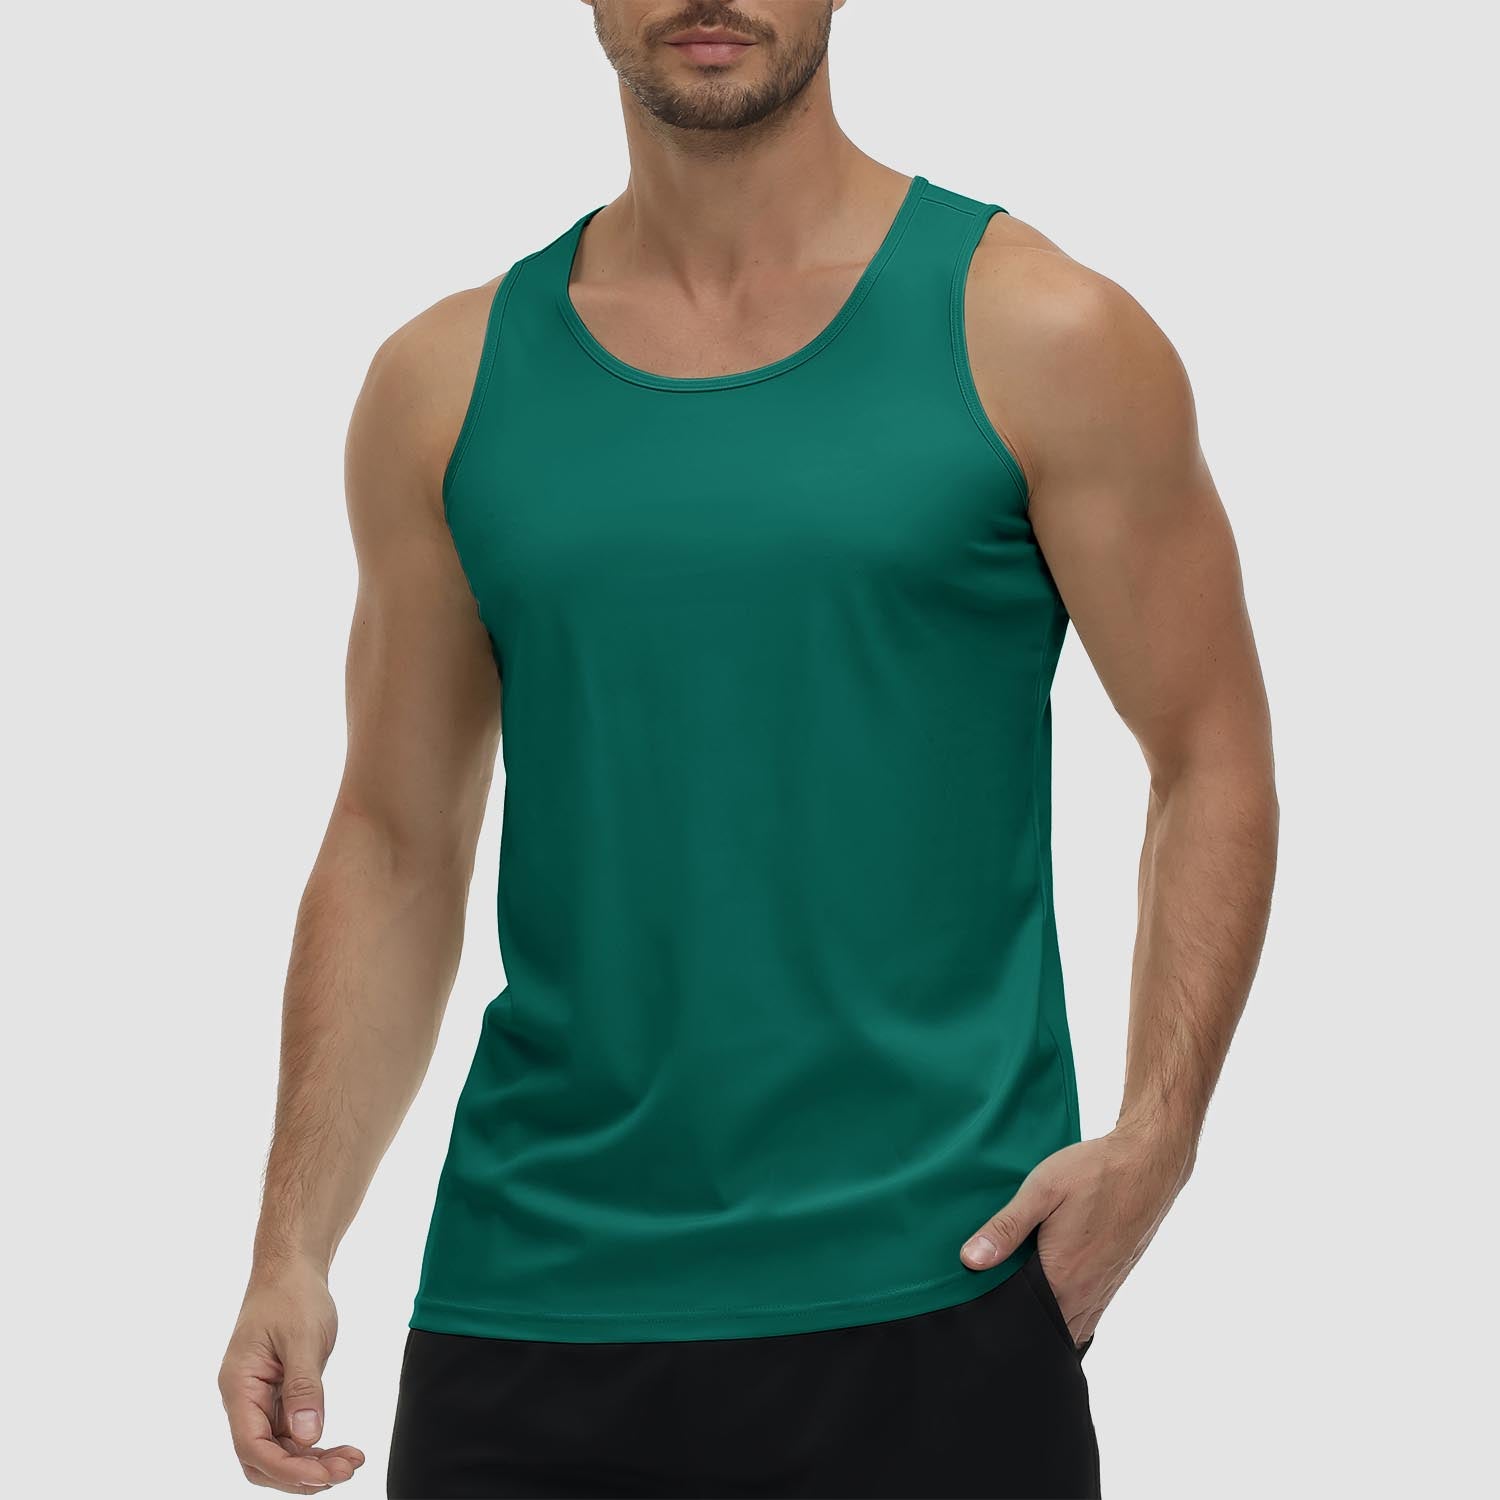 Men's Tank Top UPF 80+ Sun Protection Quick Dry Stretchy Athletic Sleeveless Shirts for Workout Training